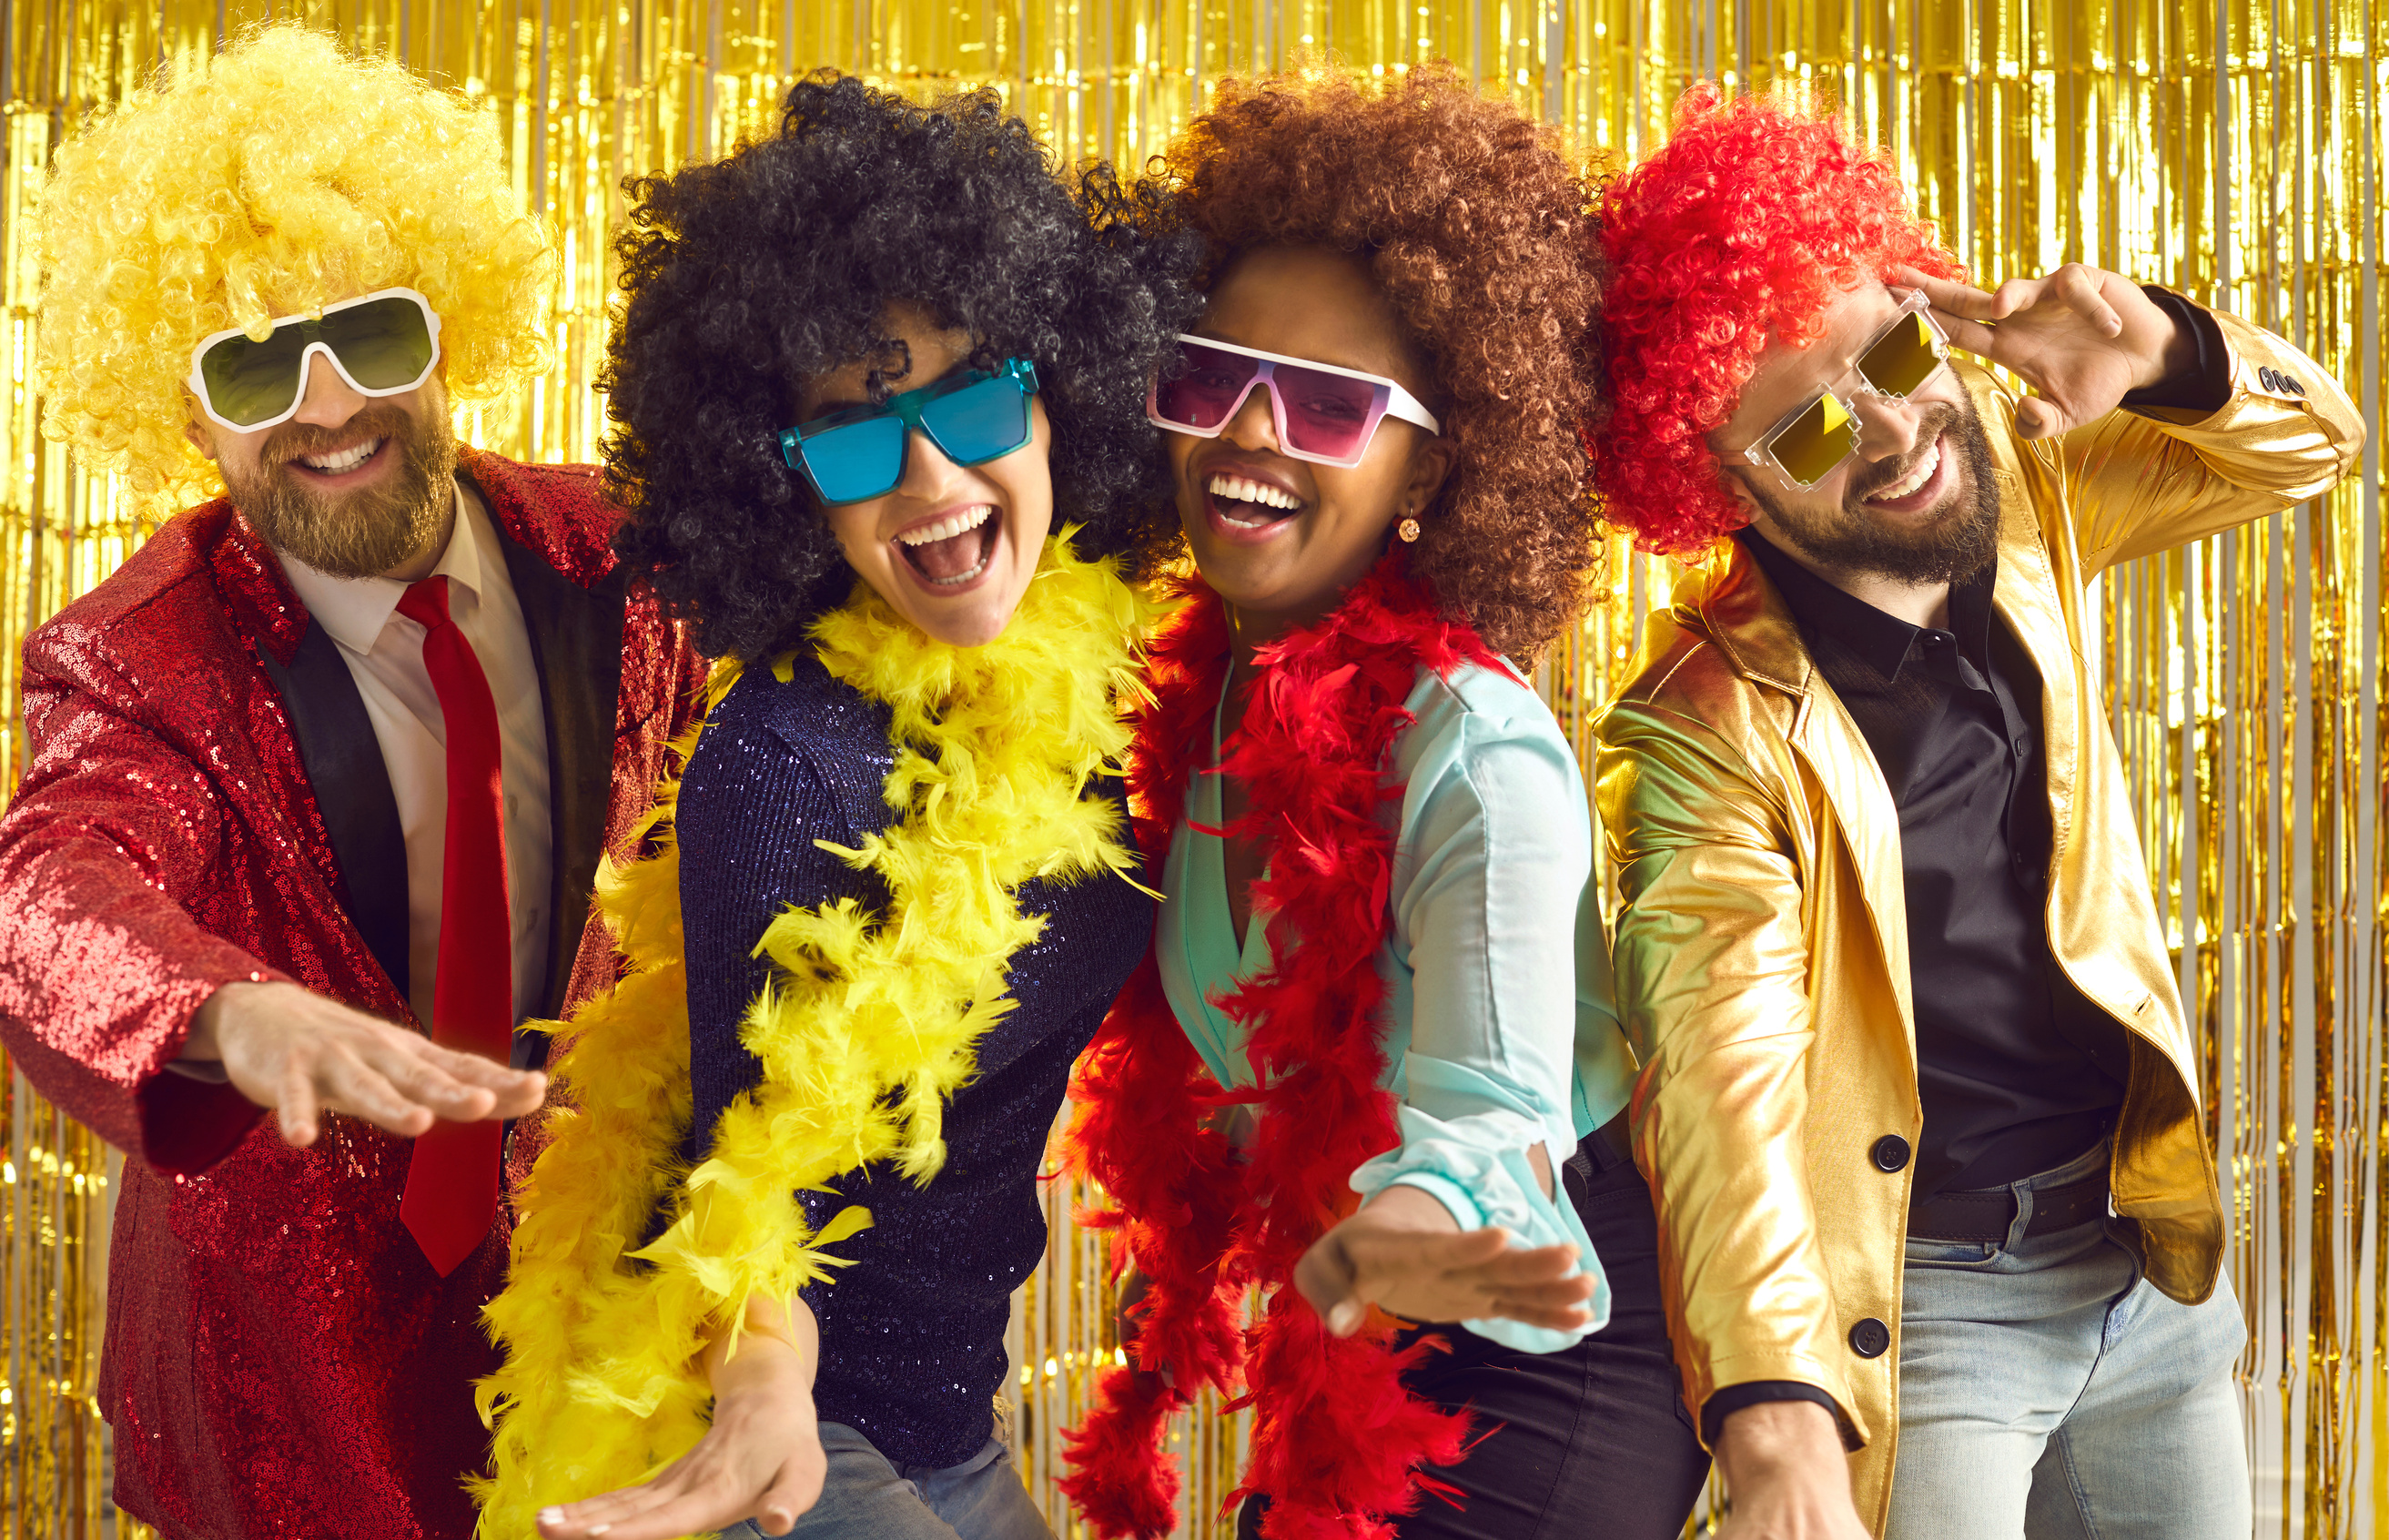 Group of Happy People in Boas and Curly Wigs Dancing and Having Fun at Disco Party